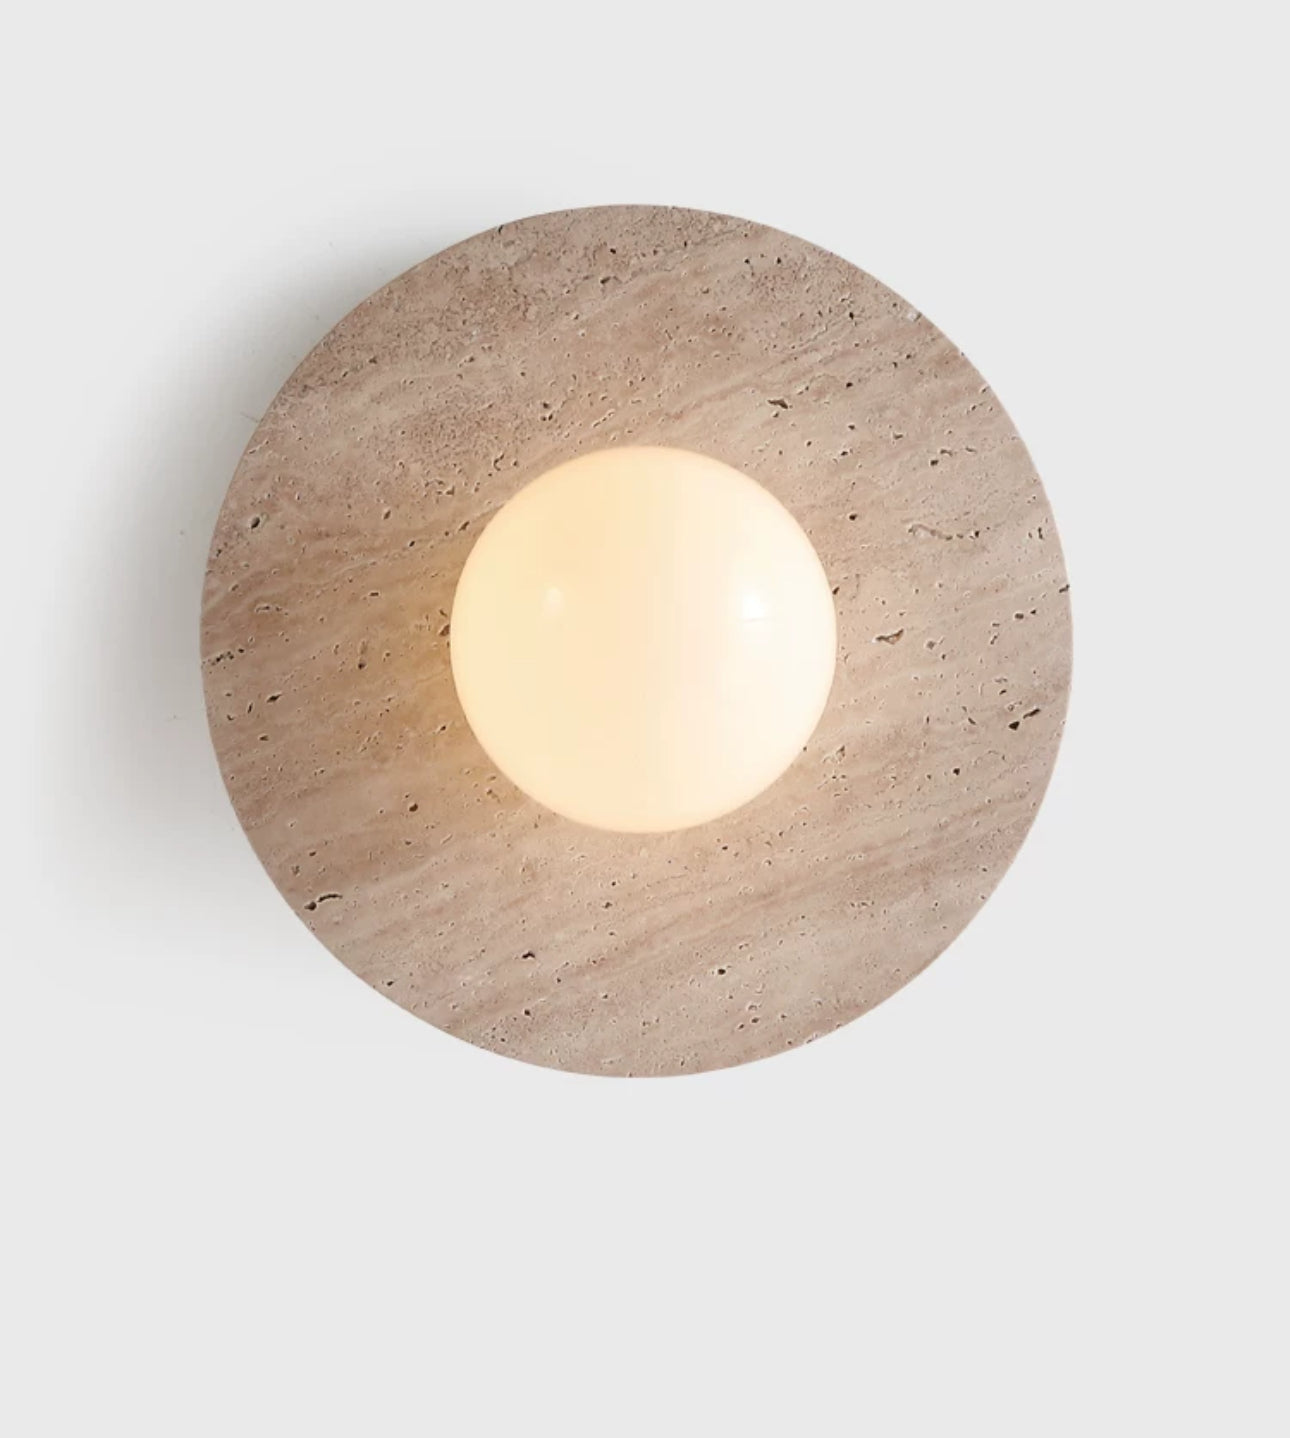 Round Marble 28cm Diameter Three Color Changeable Led Lighting Intelligent Control - Minimalist Wall Lamps